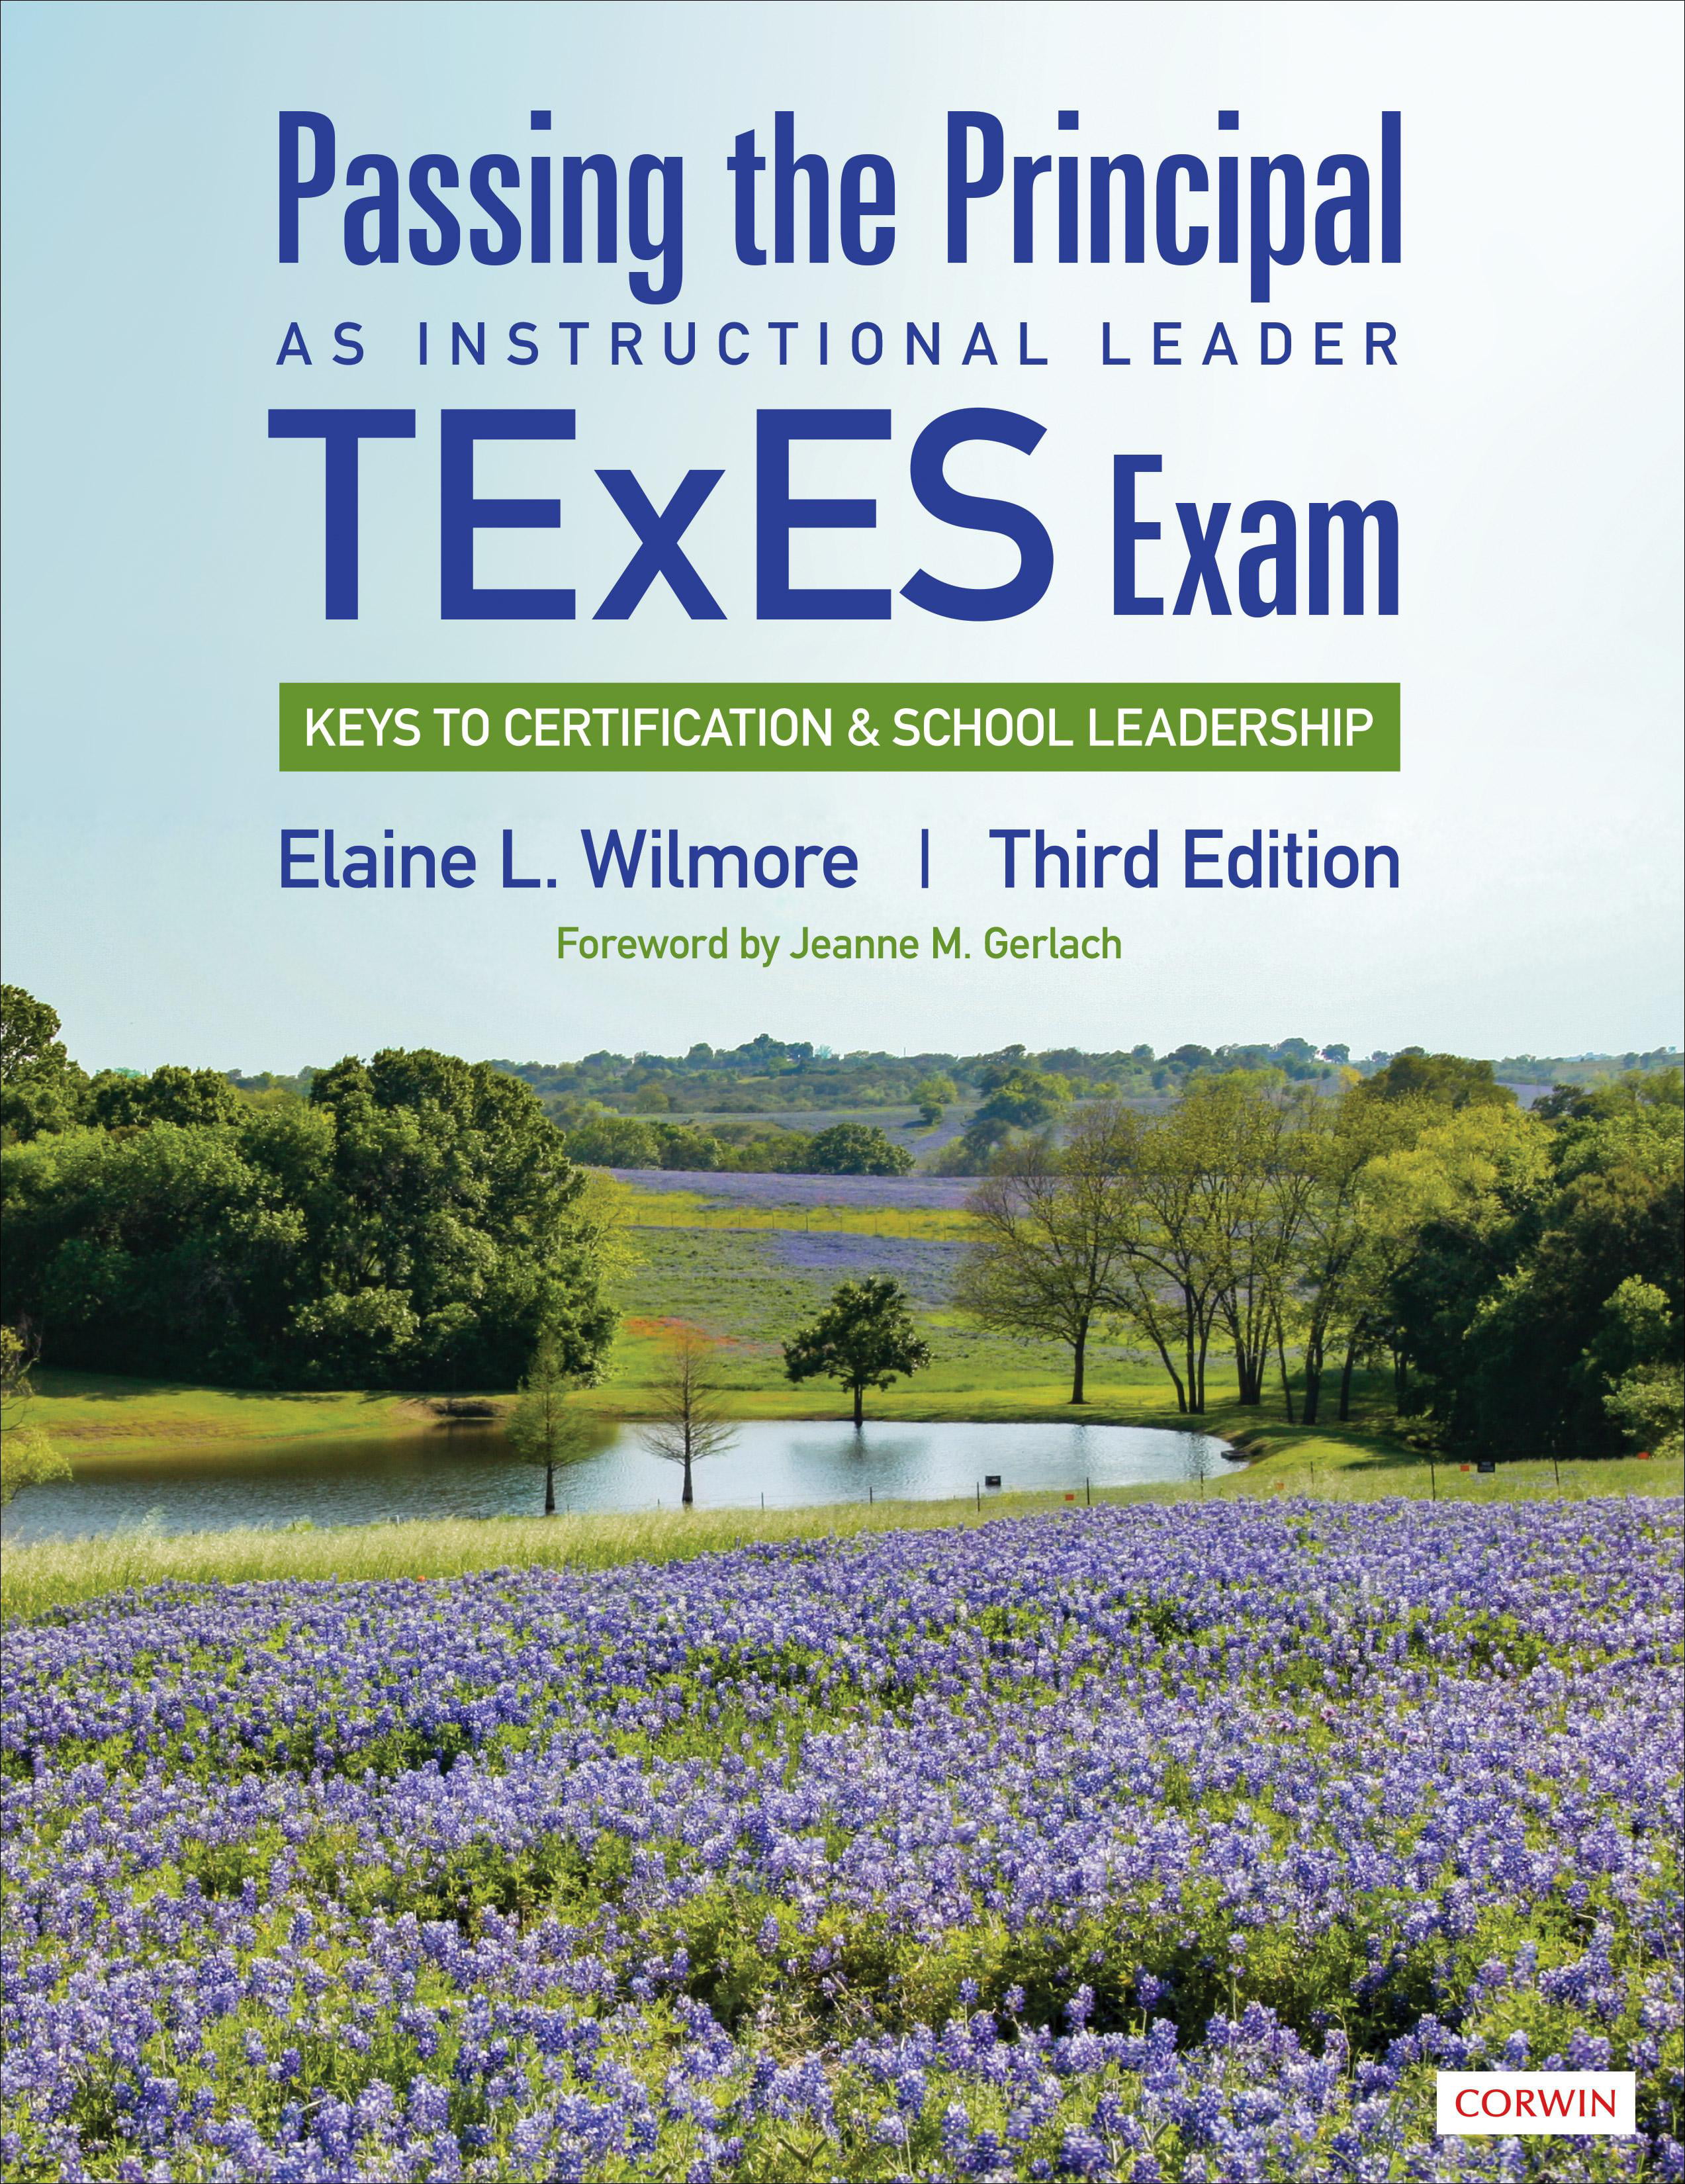 Passing-the-Principal-TExES-Exam-Keys-to-Certification-and-School-Leadership